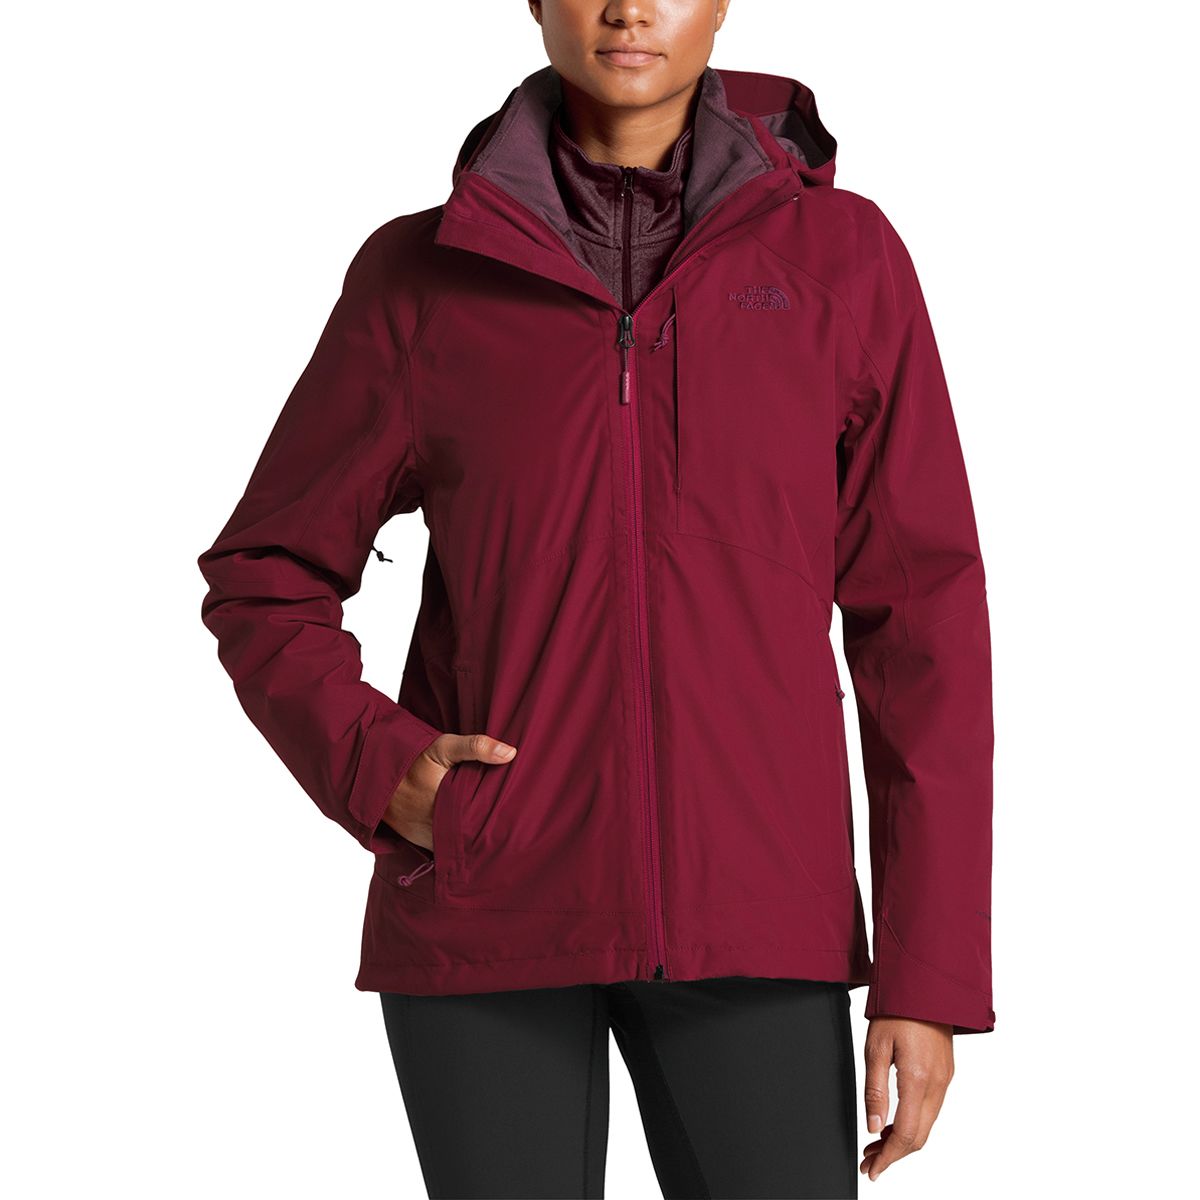 north face women's osito triclimate jacket